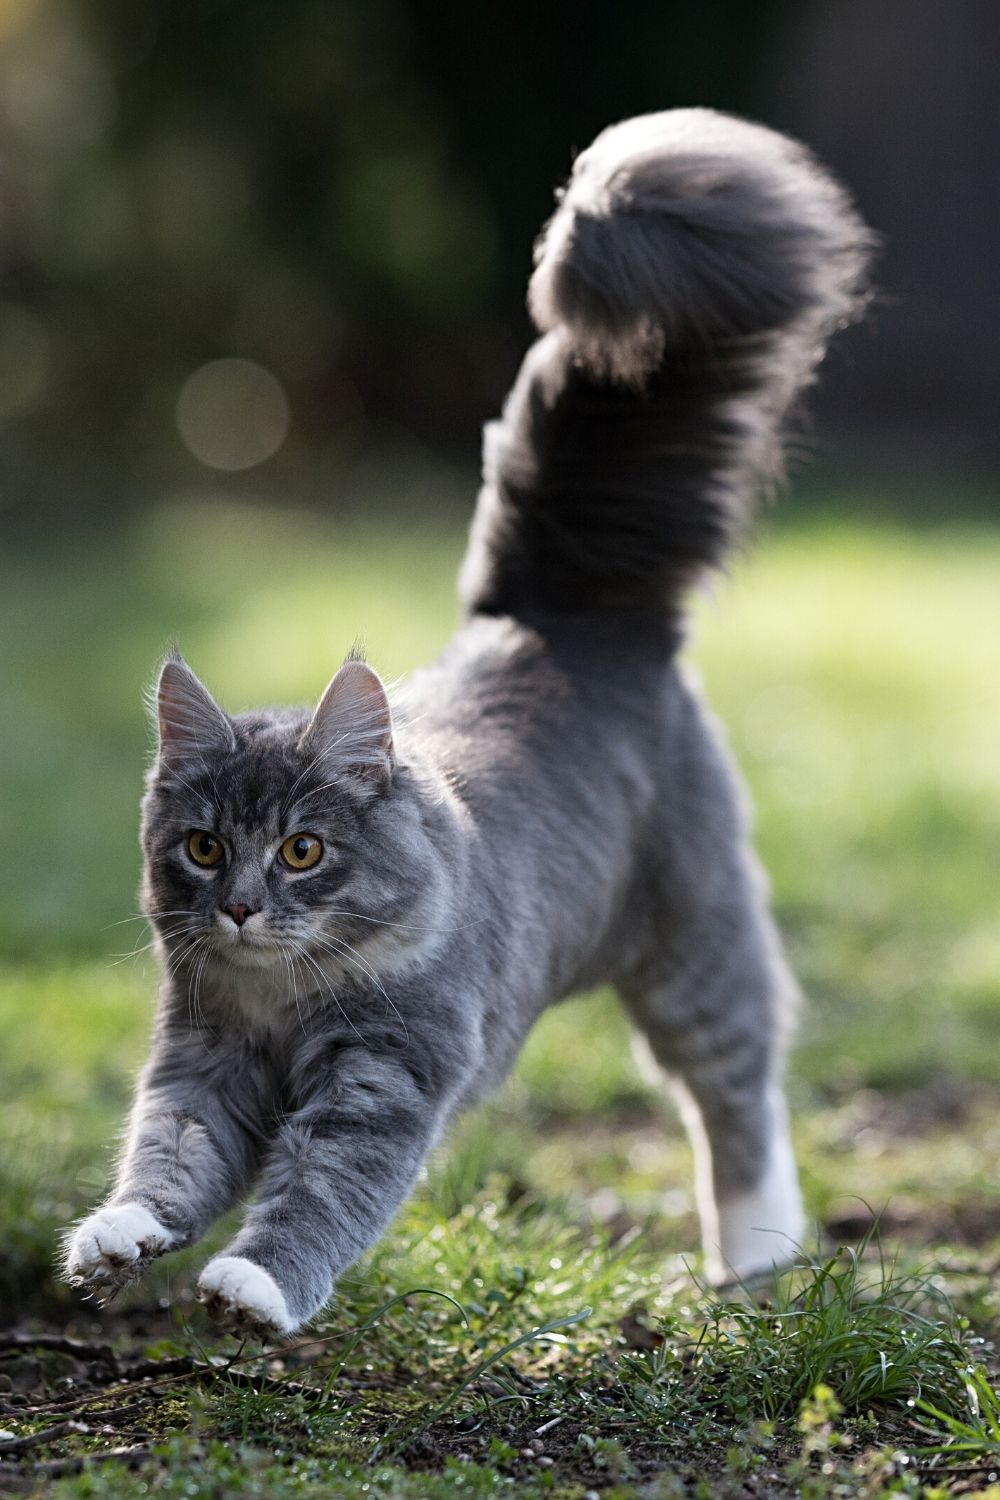 Cats coil and stretch whenever they run, allowing them to run as fast as 30 miles per hour